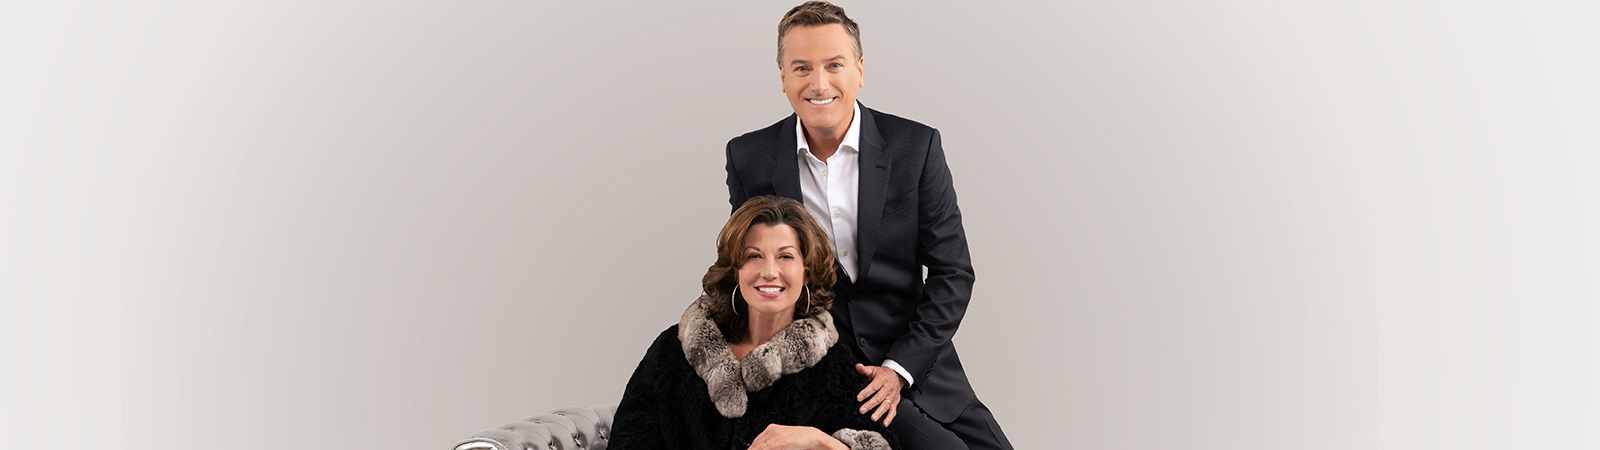 Amy Grant and Michael W. Smith On Sale